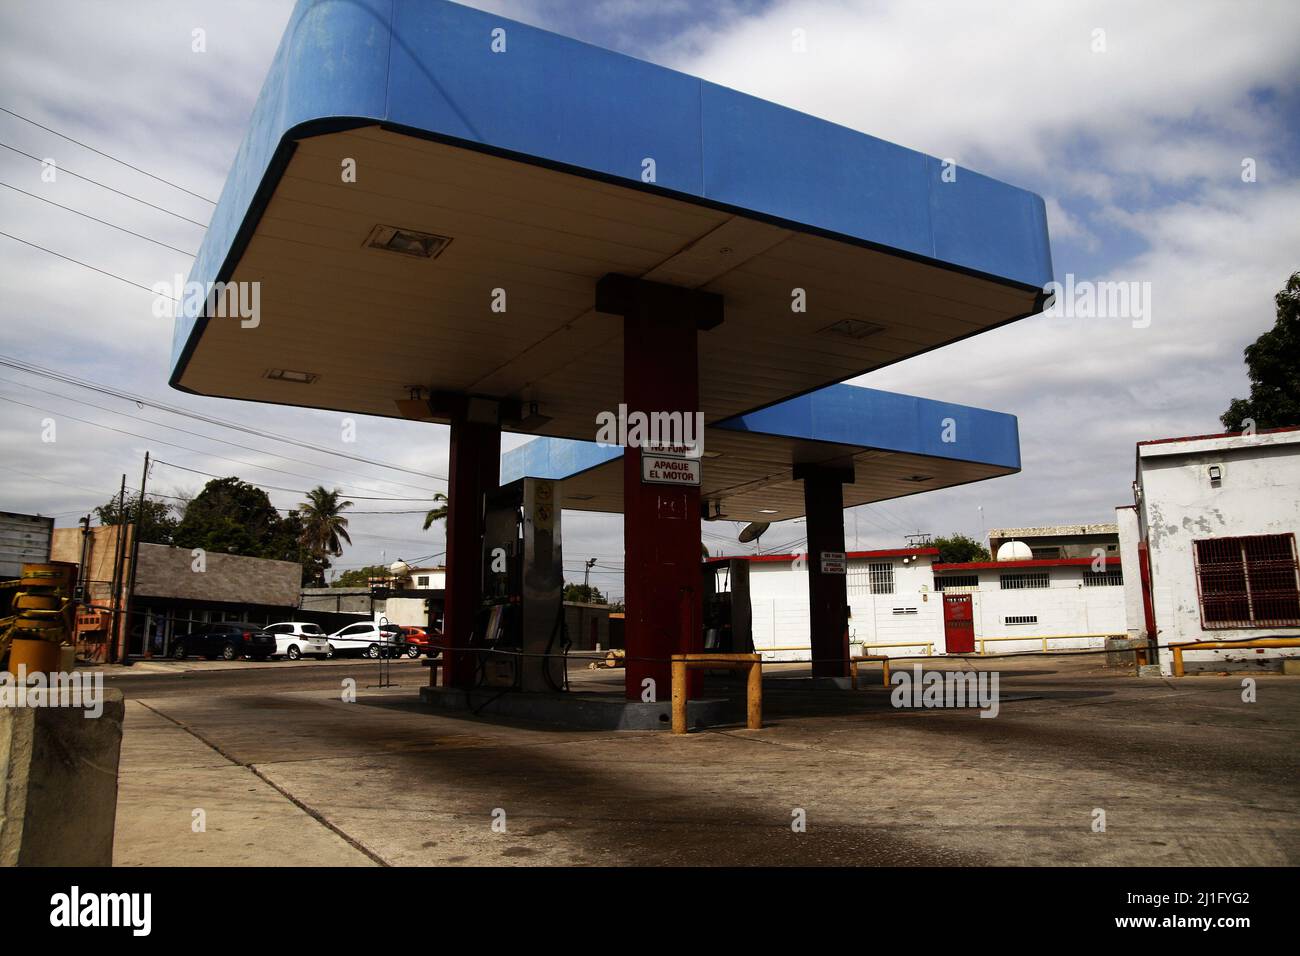 Deserted service stations today, Thursday, March 24, 2022, in the city of Maracaibo, Venezuela. Only 10% of the 216 gas stations in the entity receive Stock Photo